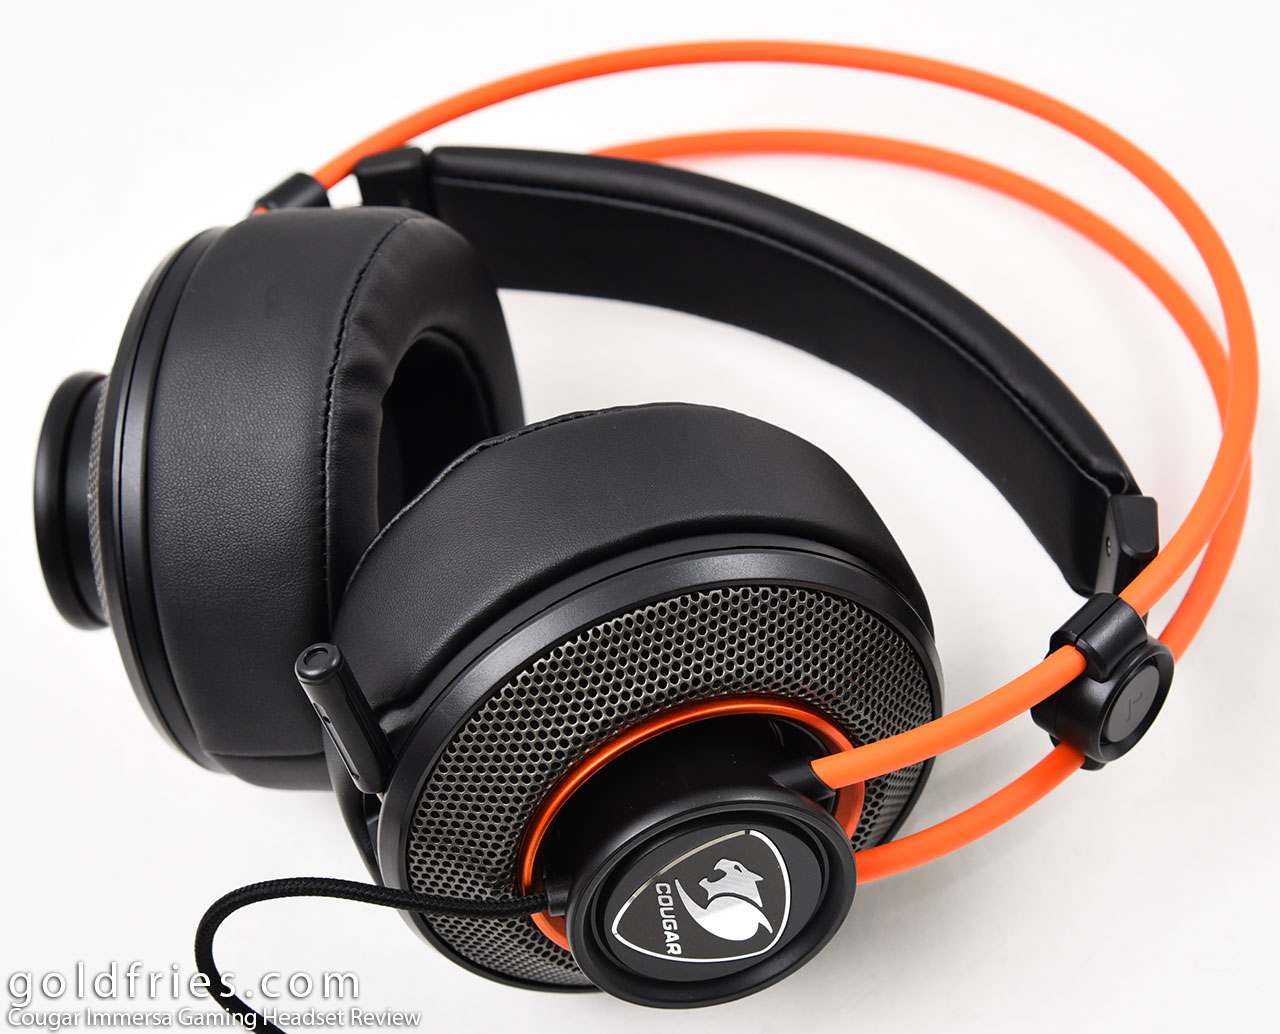 Cougar Immersa Gaming Headset Review